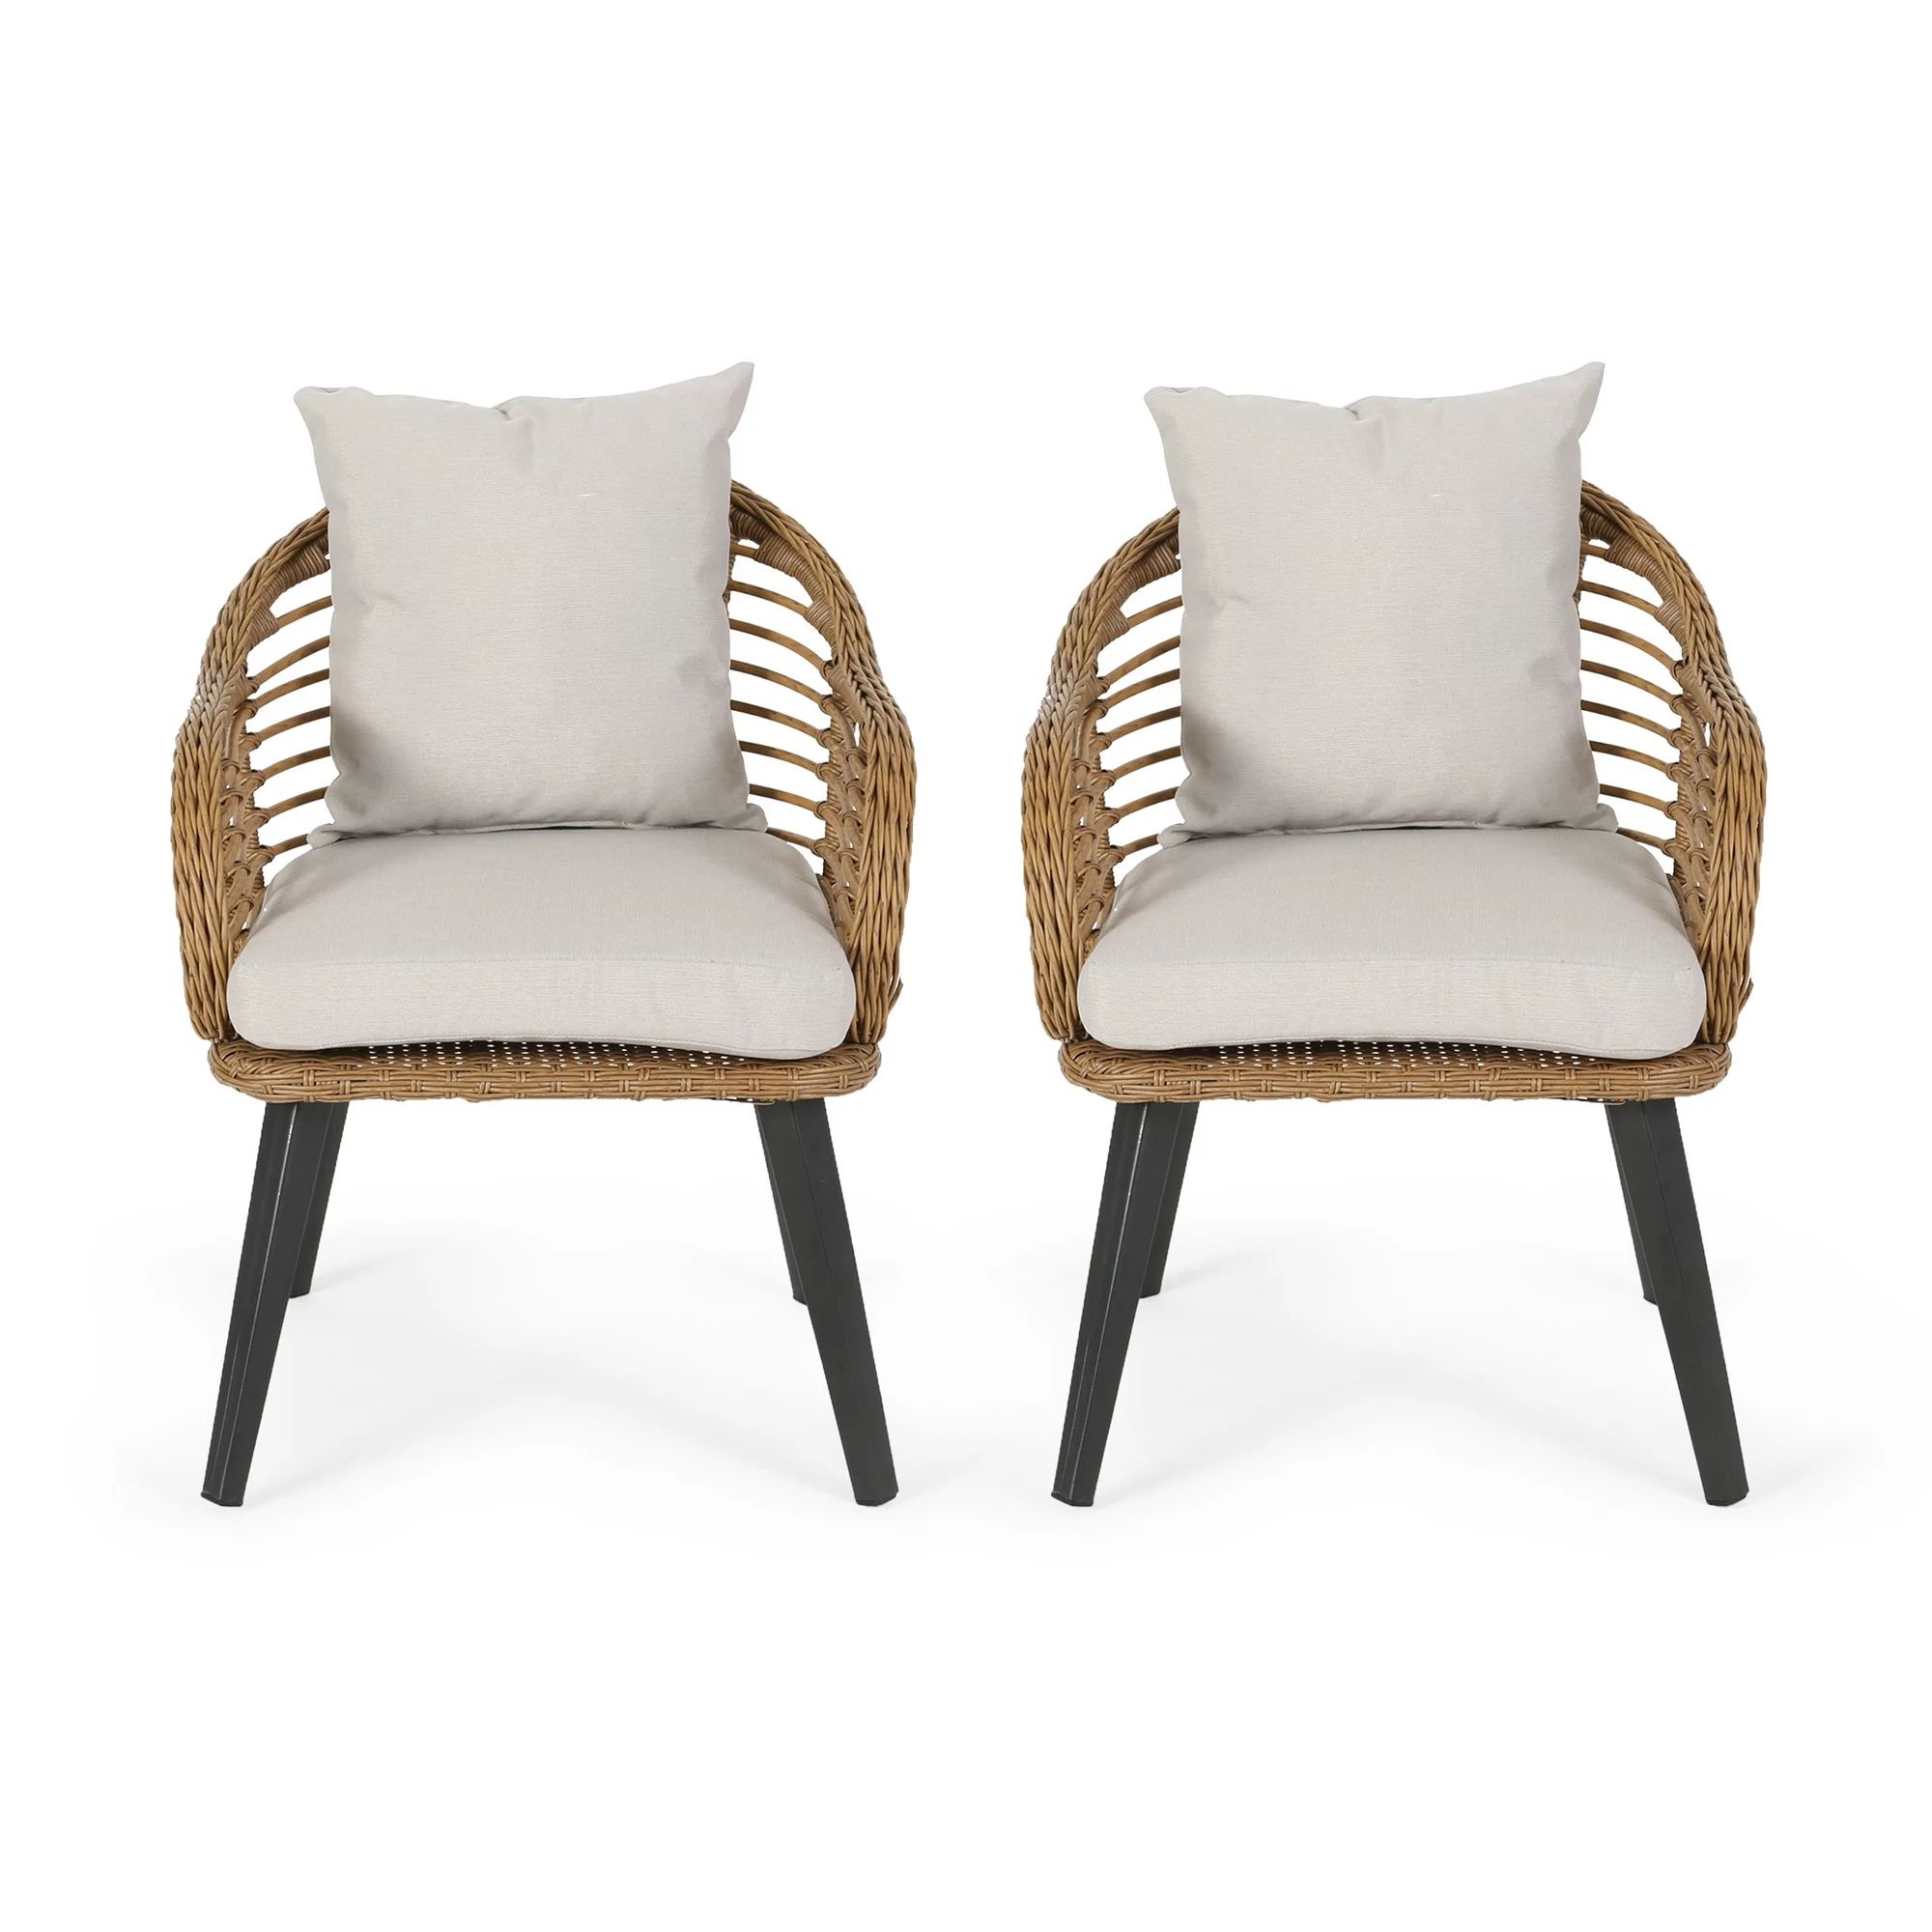 Noble House Tatiana Outdoor Wicker Club Chair in Brown and Beige (Set of 2) | Walmart (US)